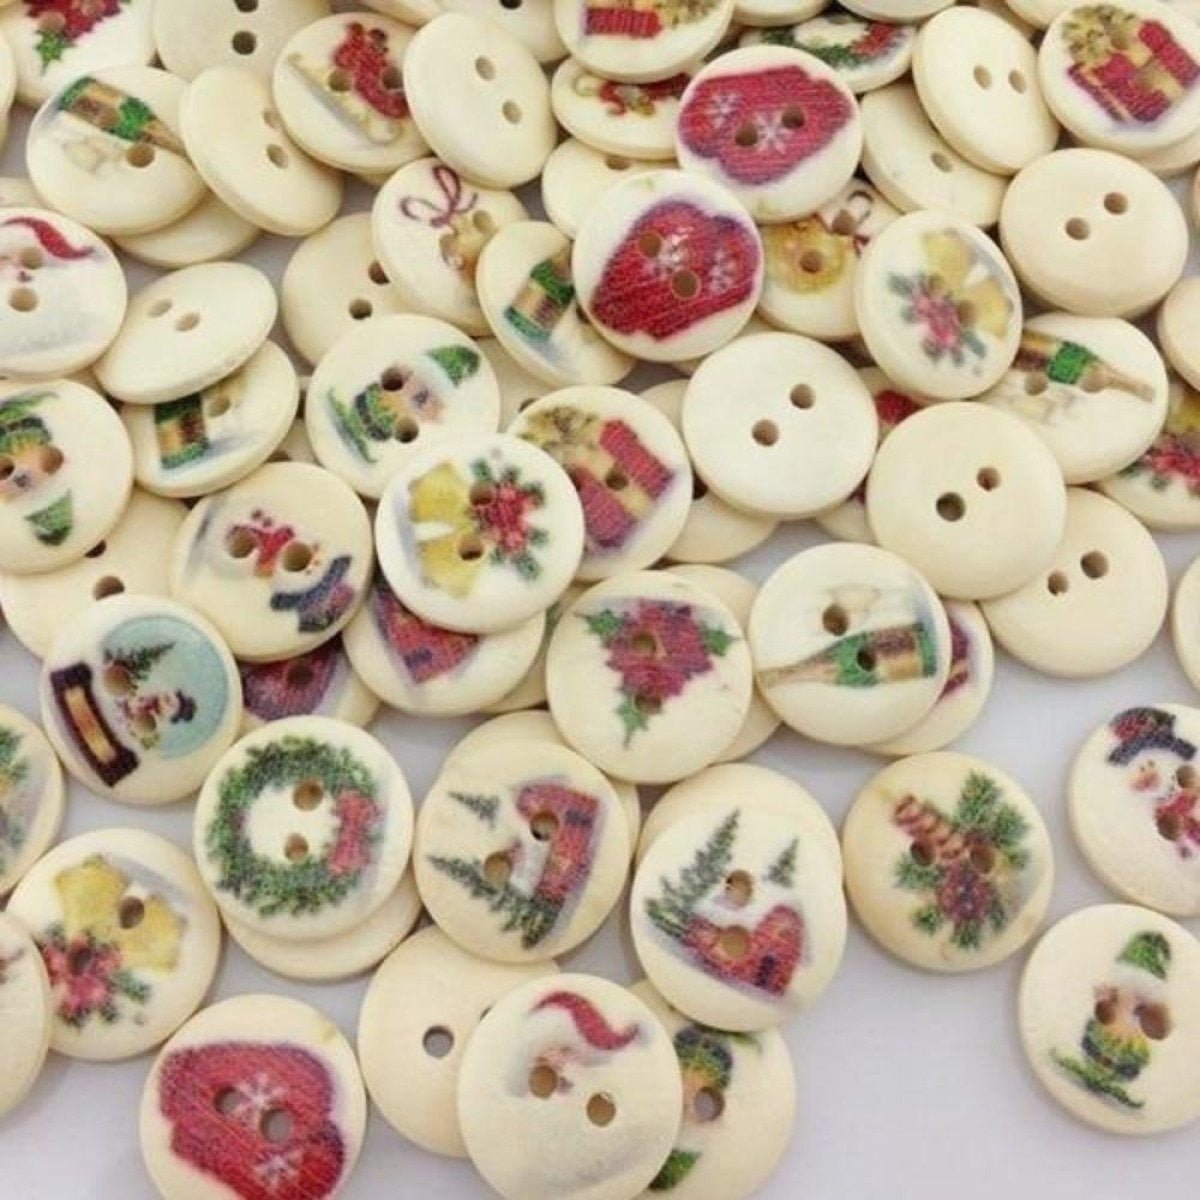 100pcs Mixed Wooden Buttons Flower for Clothing Craft Sewing DIY 2 Hole 15mm - Christmas - - Asia Sell